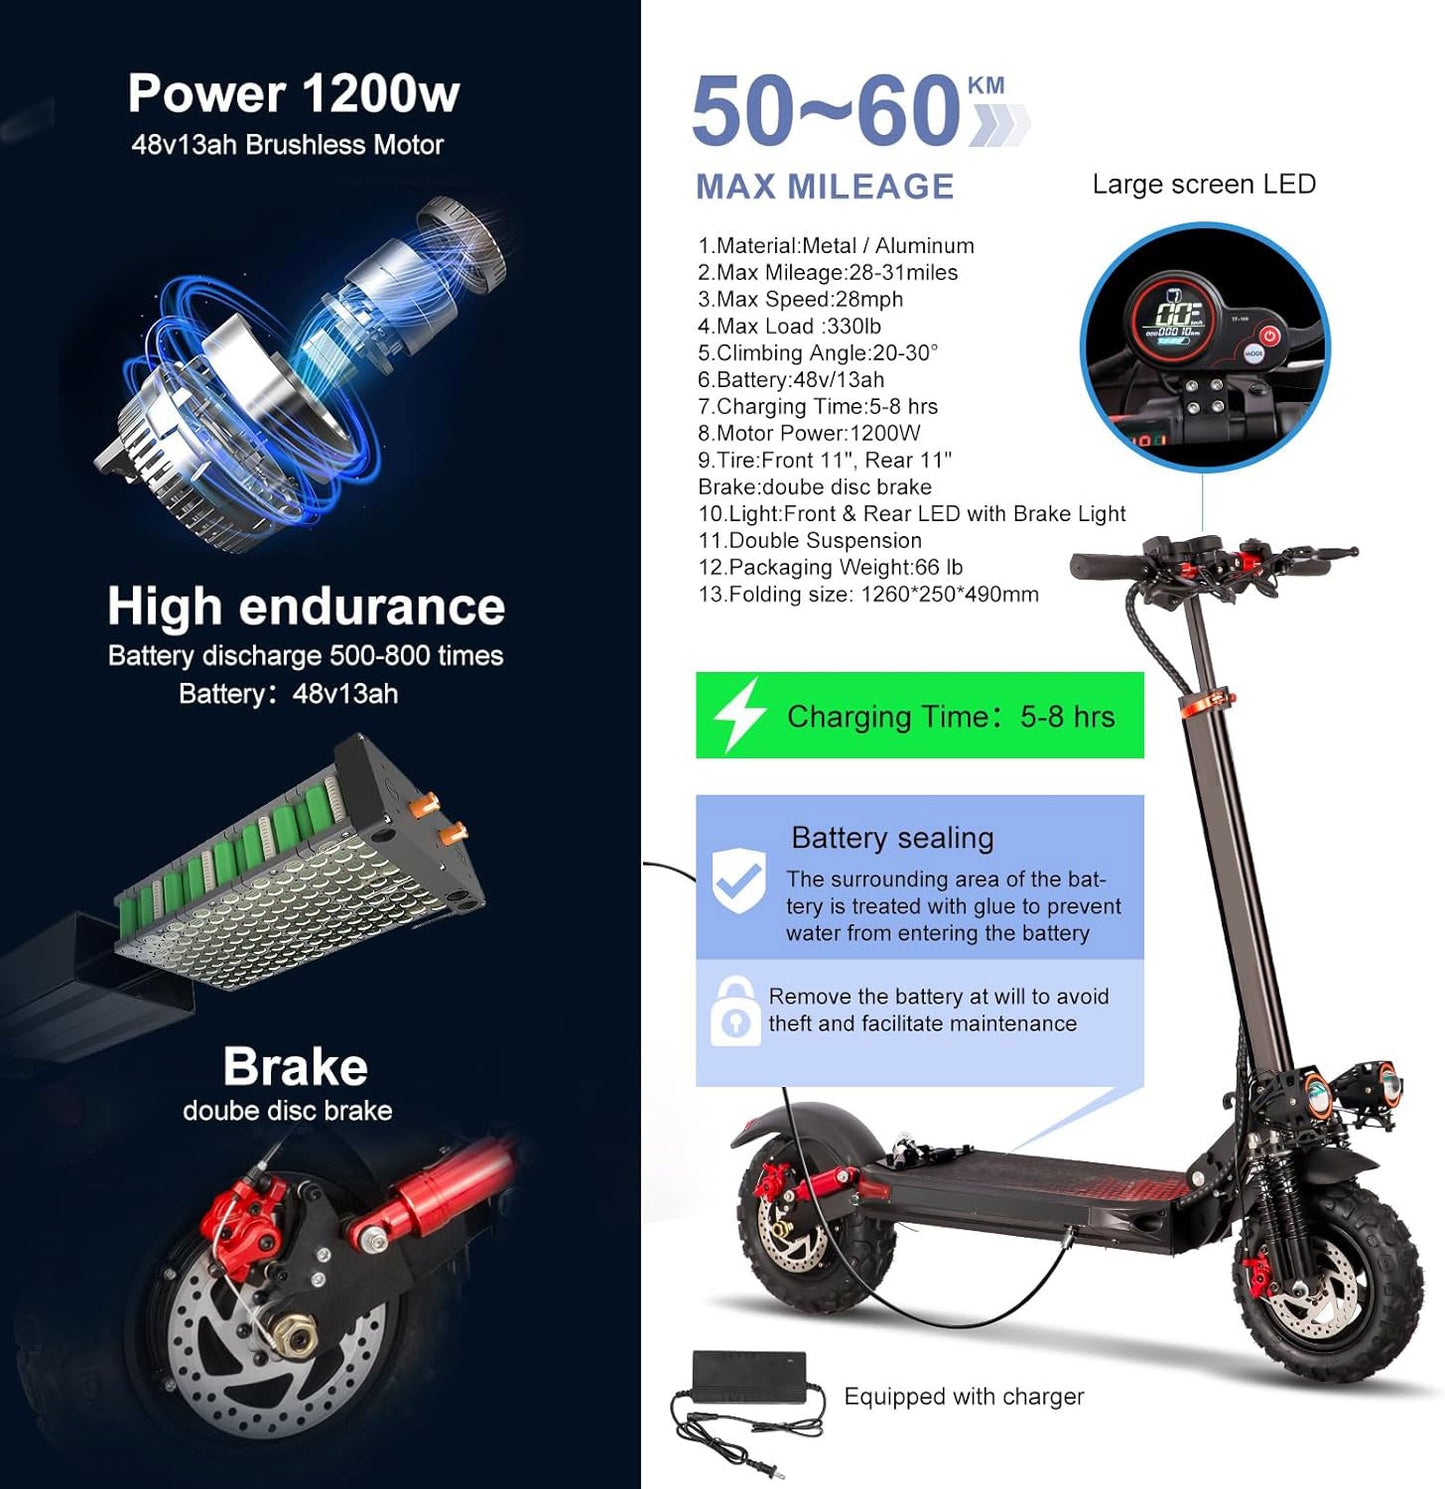 J11-PRO ELECTRIC SCOOTER